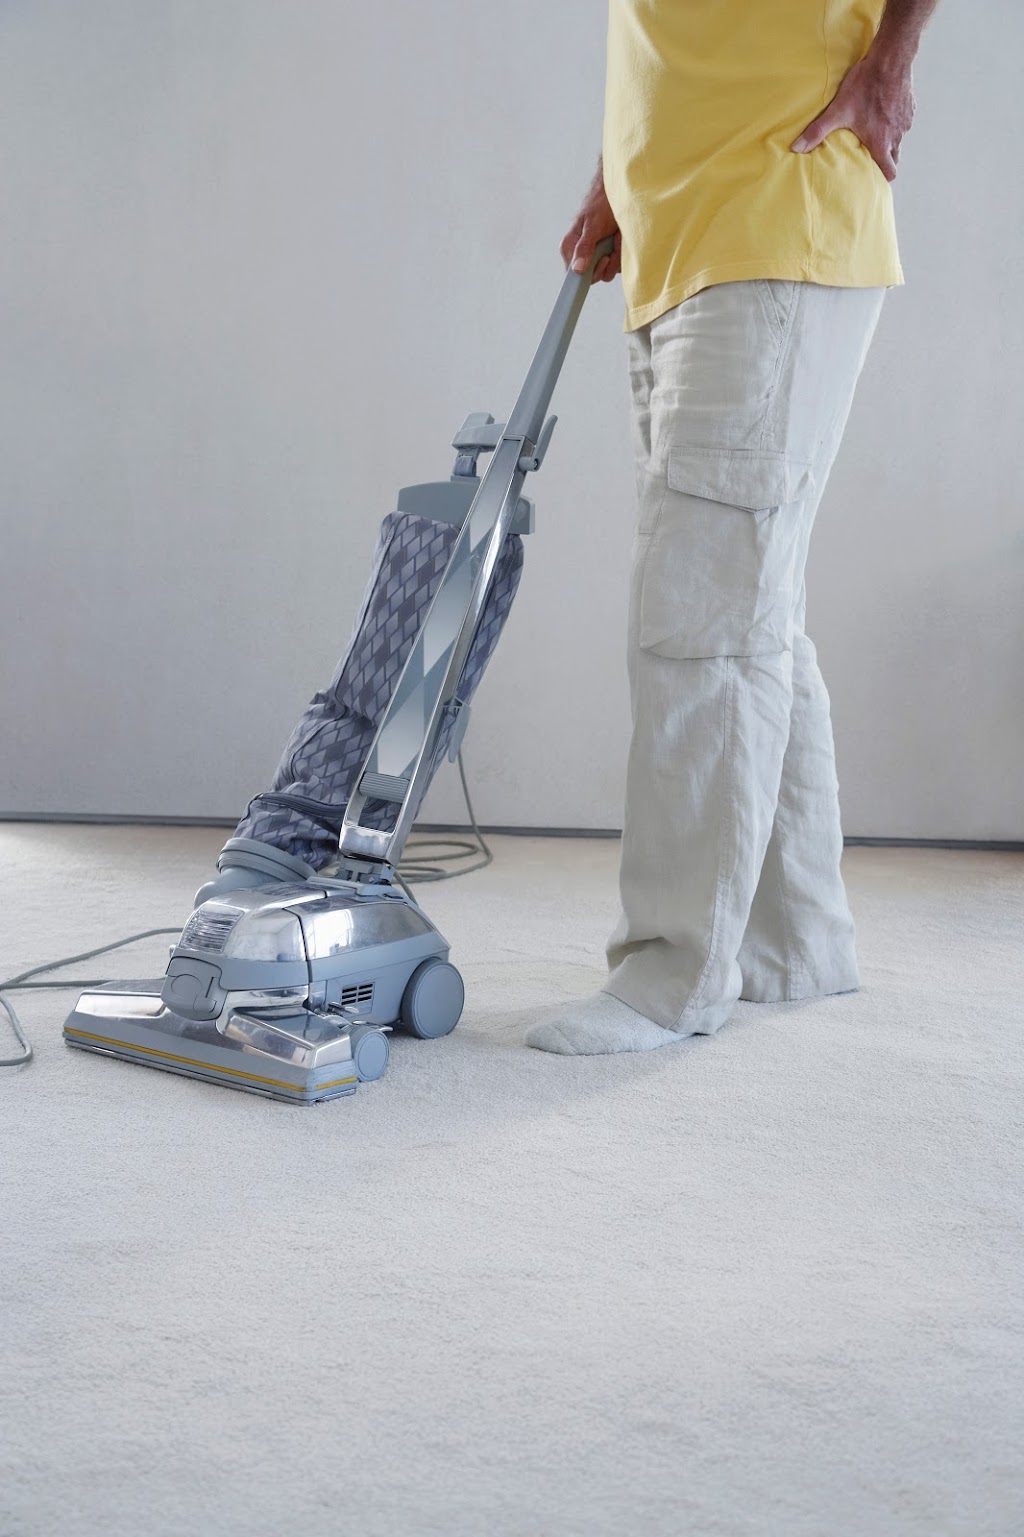 RD Local Carpet Cleaning | Carpet Cleaning Servicing North Ryde, Denistone, Denistone East,, West Ryde, Putney, Eastwood, North Ryde NSW 2113, Australia | Phone: (02) 8790 0723